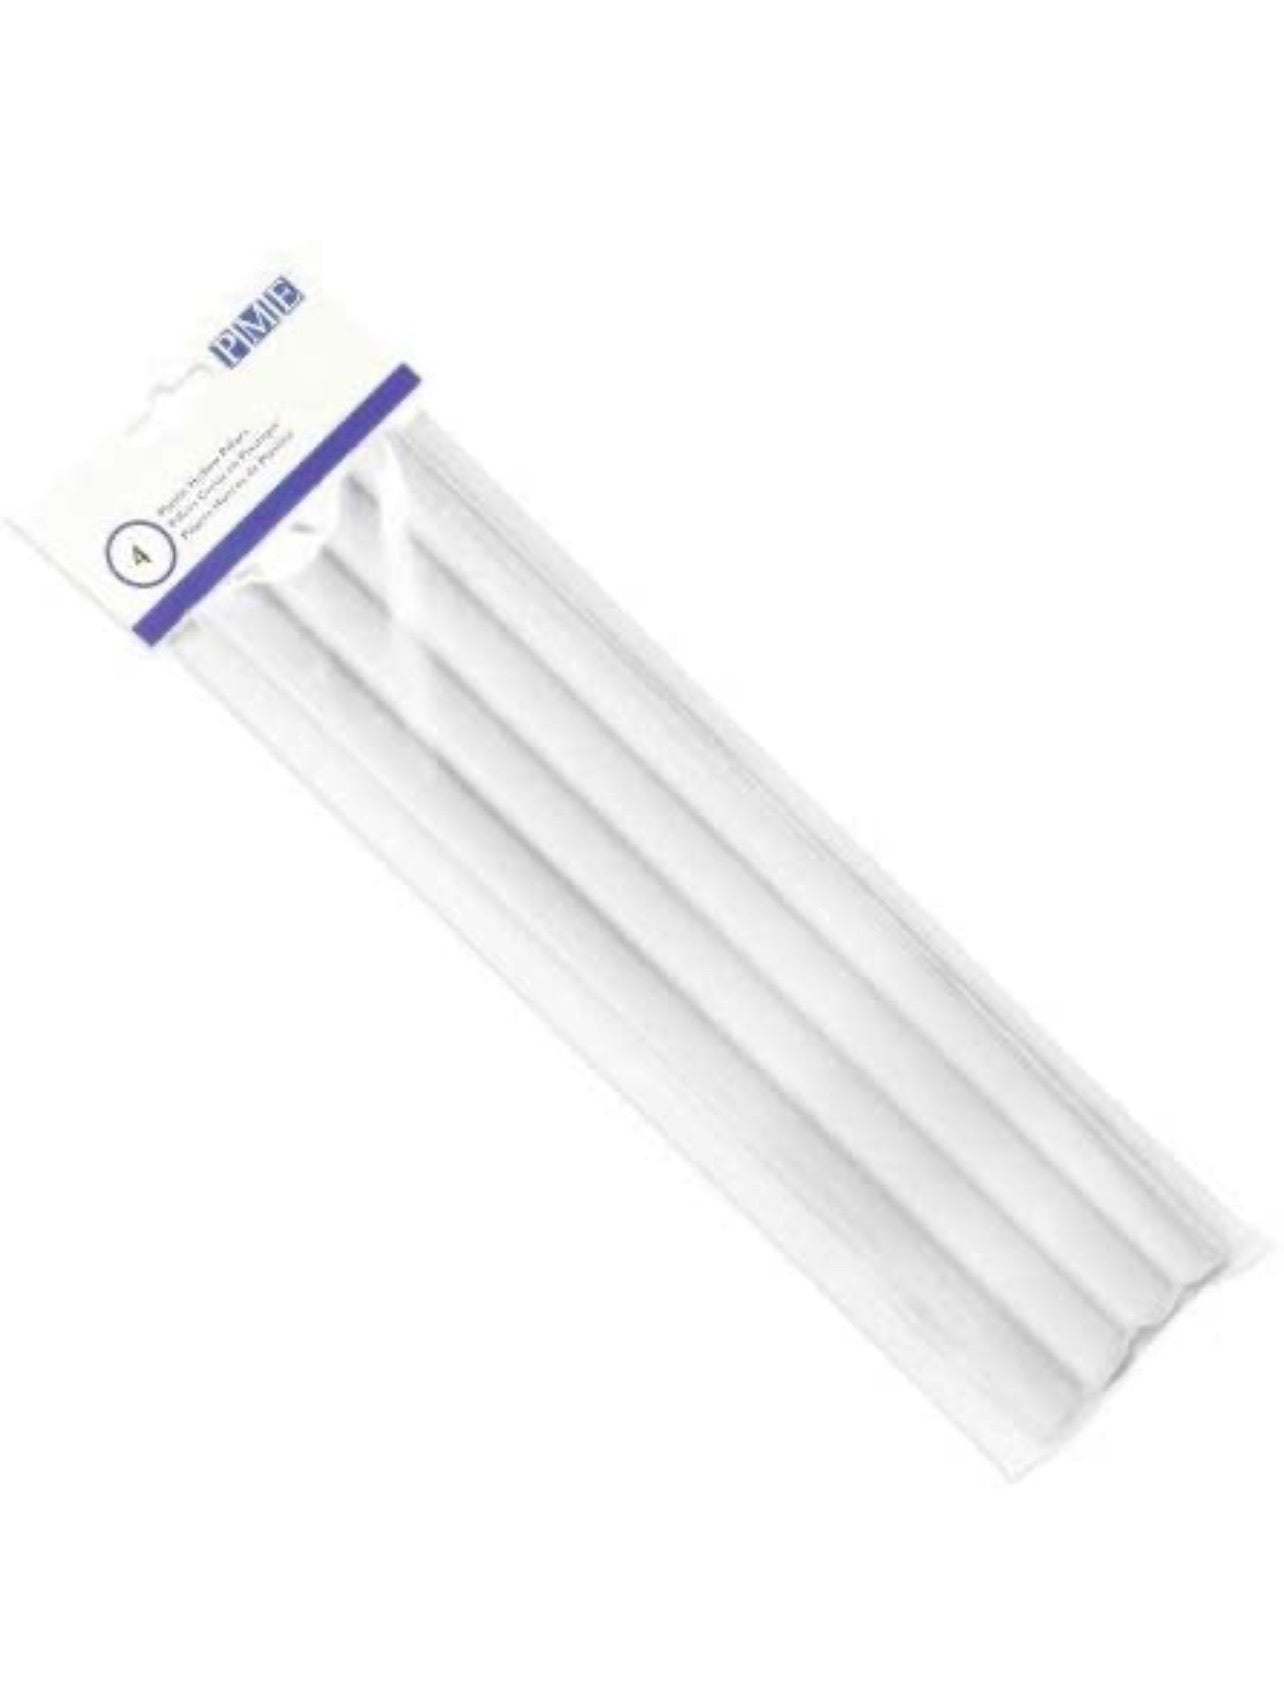 Plastic Dowel Rods for Tiered Cake Construction (Pack of 8 Pieces White)